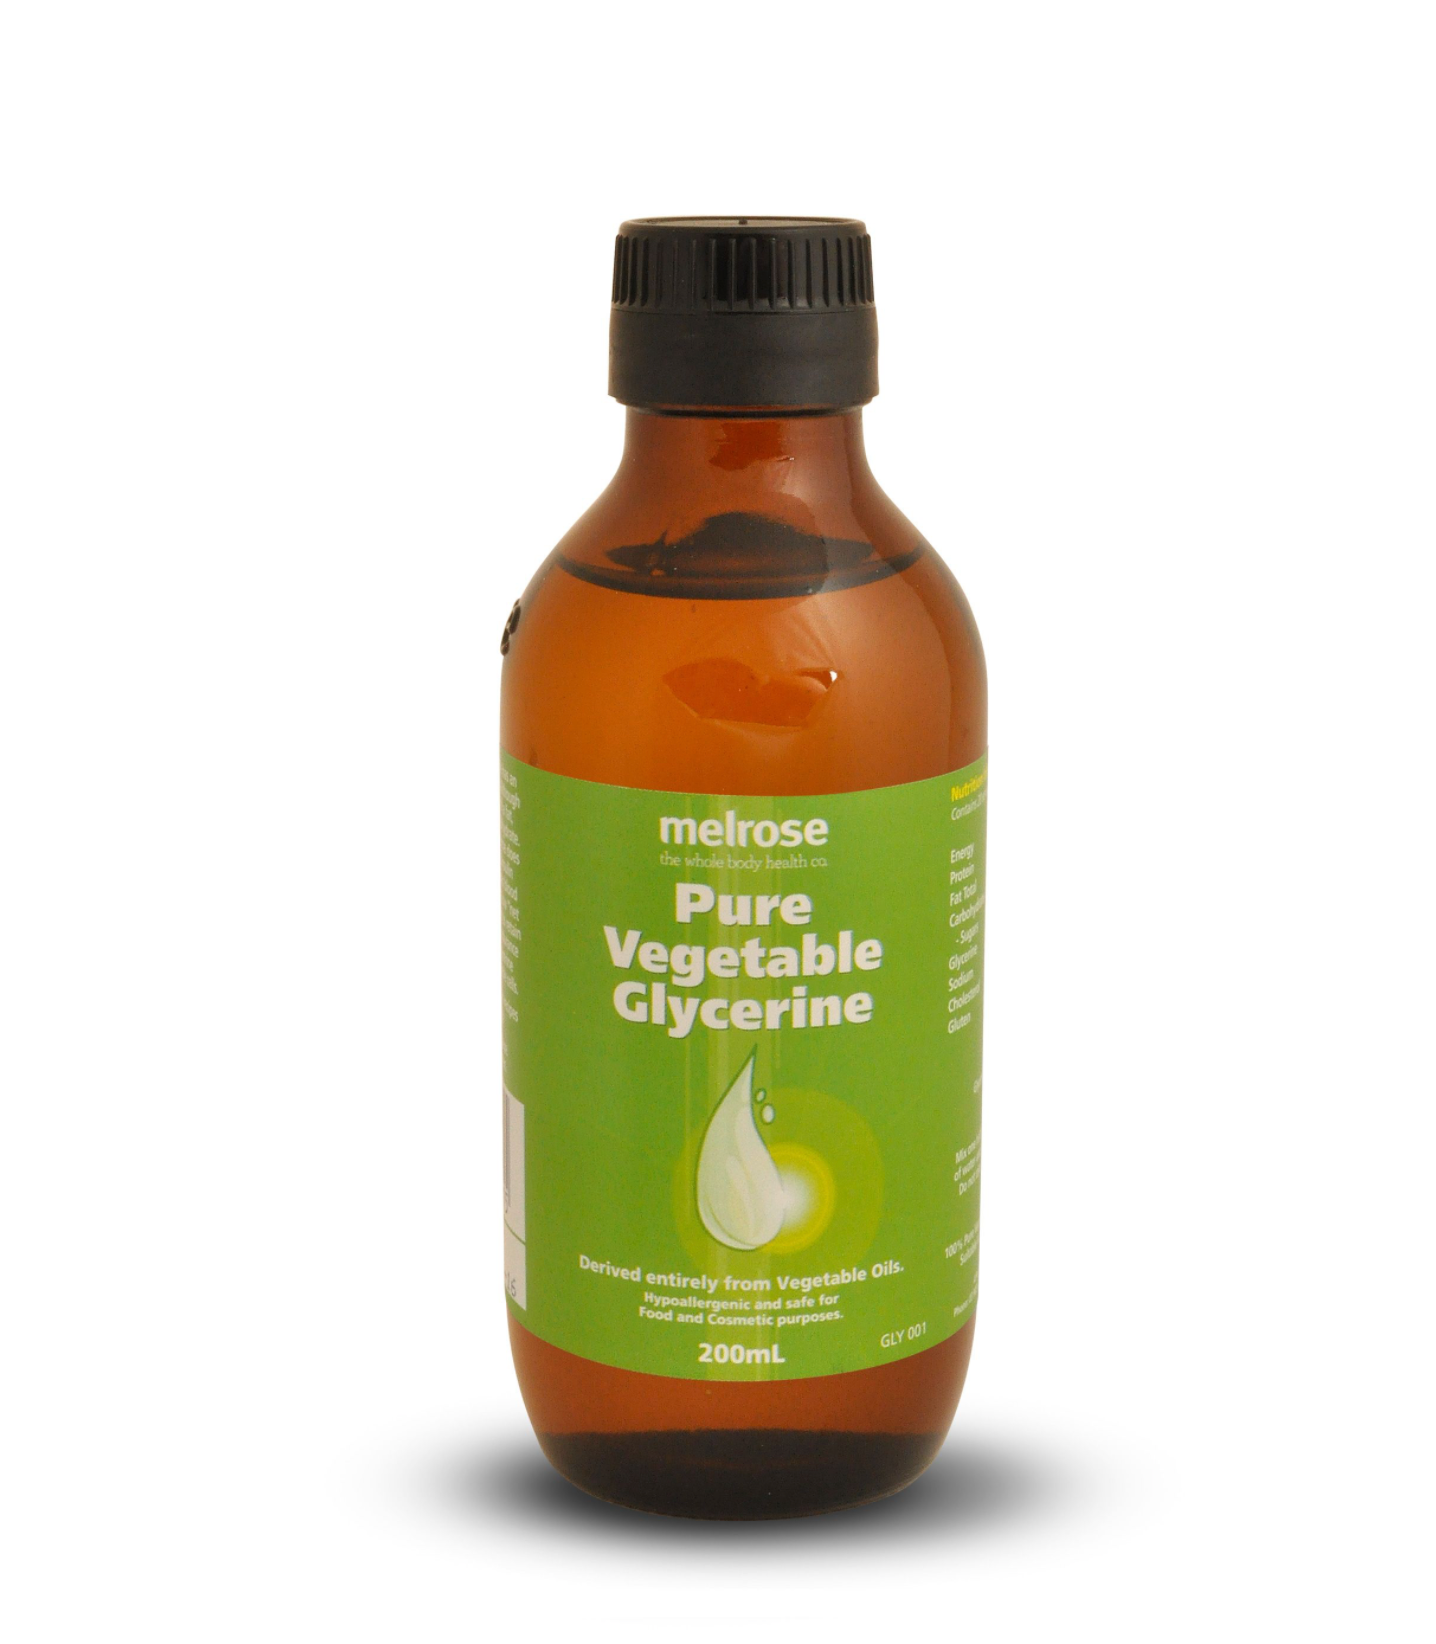 Melrose Organic Pure Vegetable Glycerine 200ml, For Food & Cosmetic Use